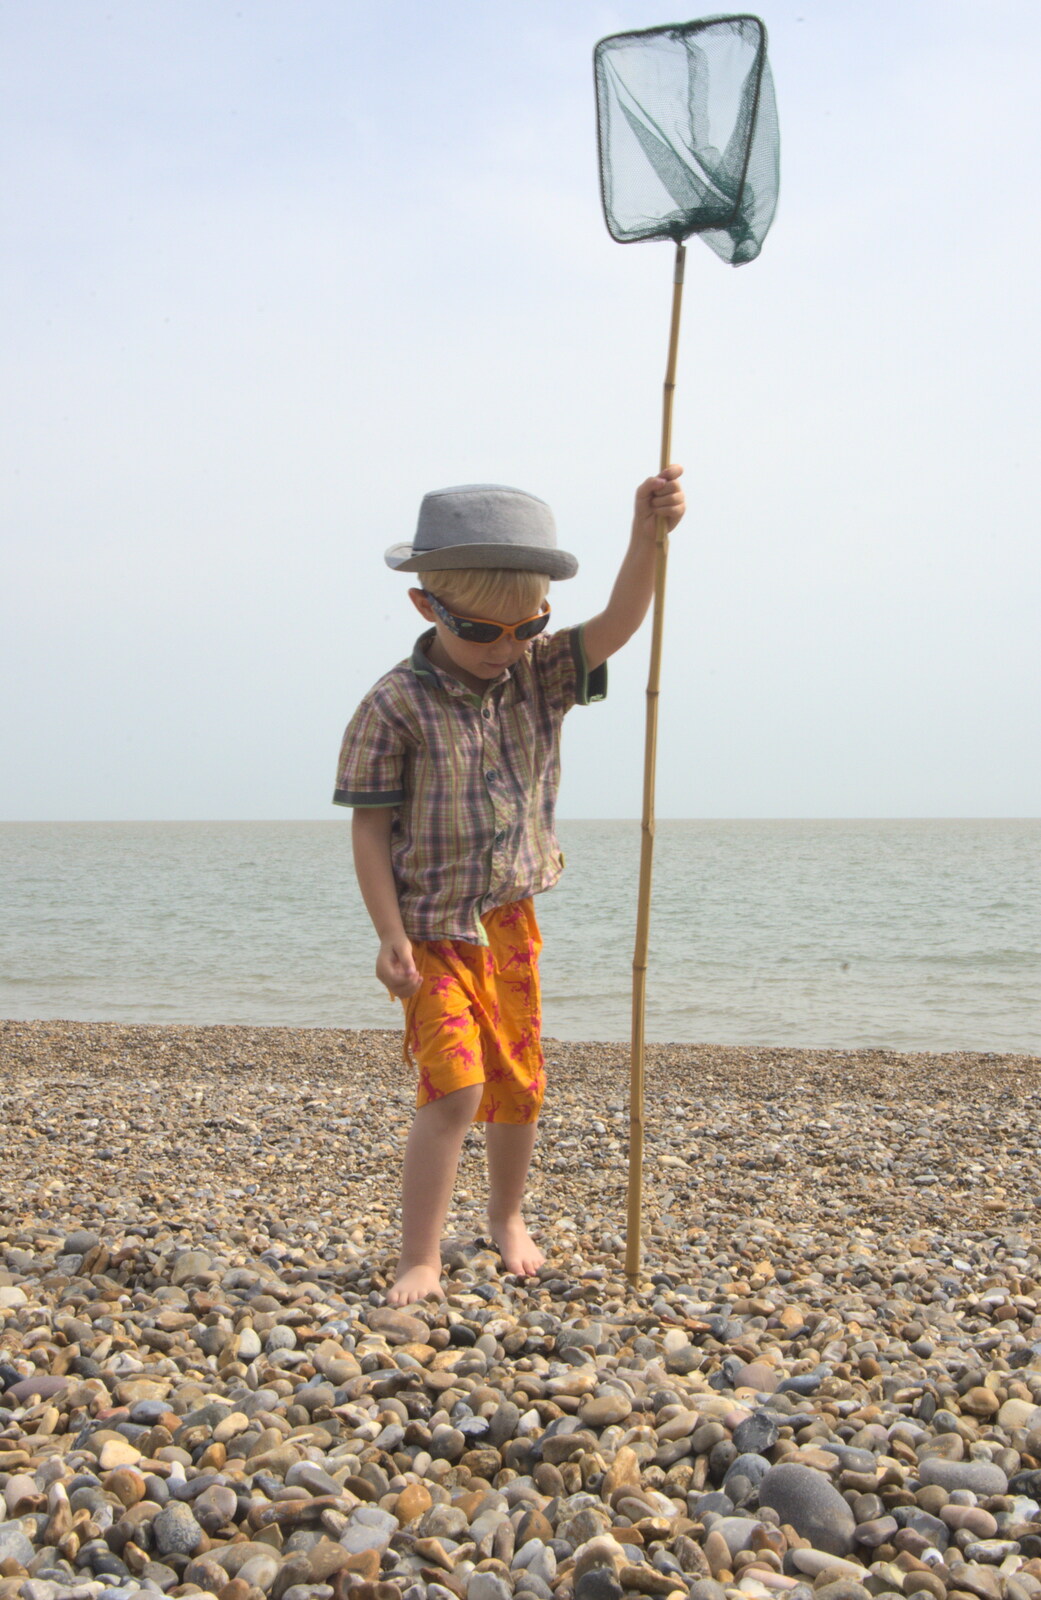 Harry with a fishing net from The Archaeology of Dunwich: A Camping Trip, Dunwich, Suffolk - 1st August 2015